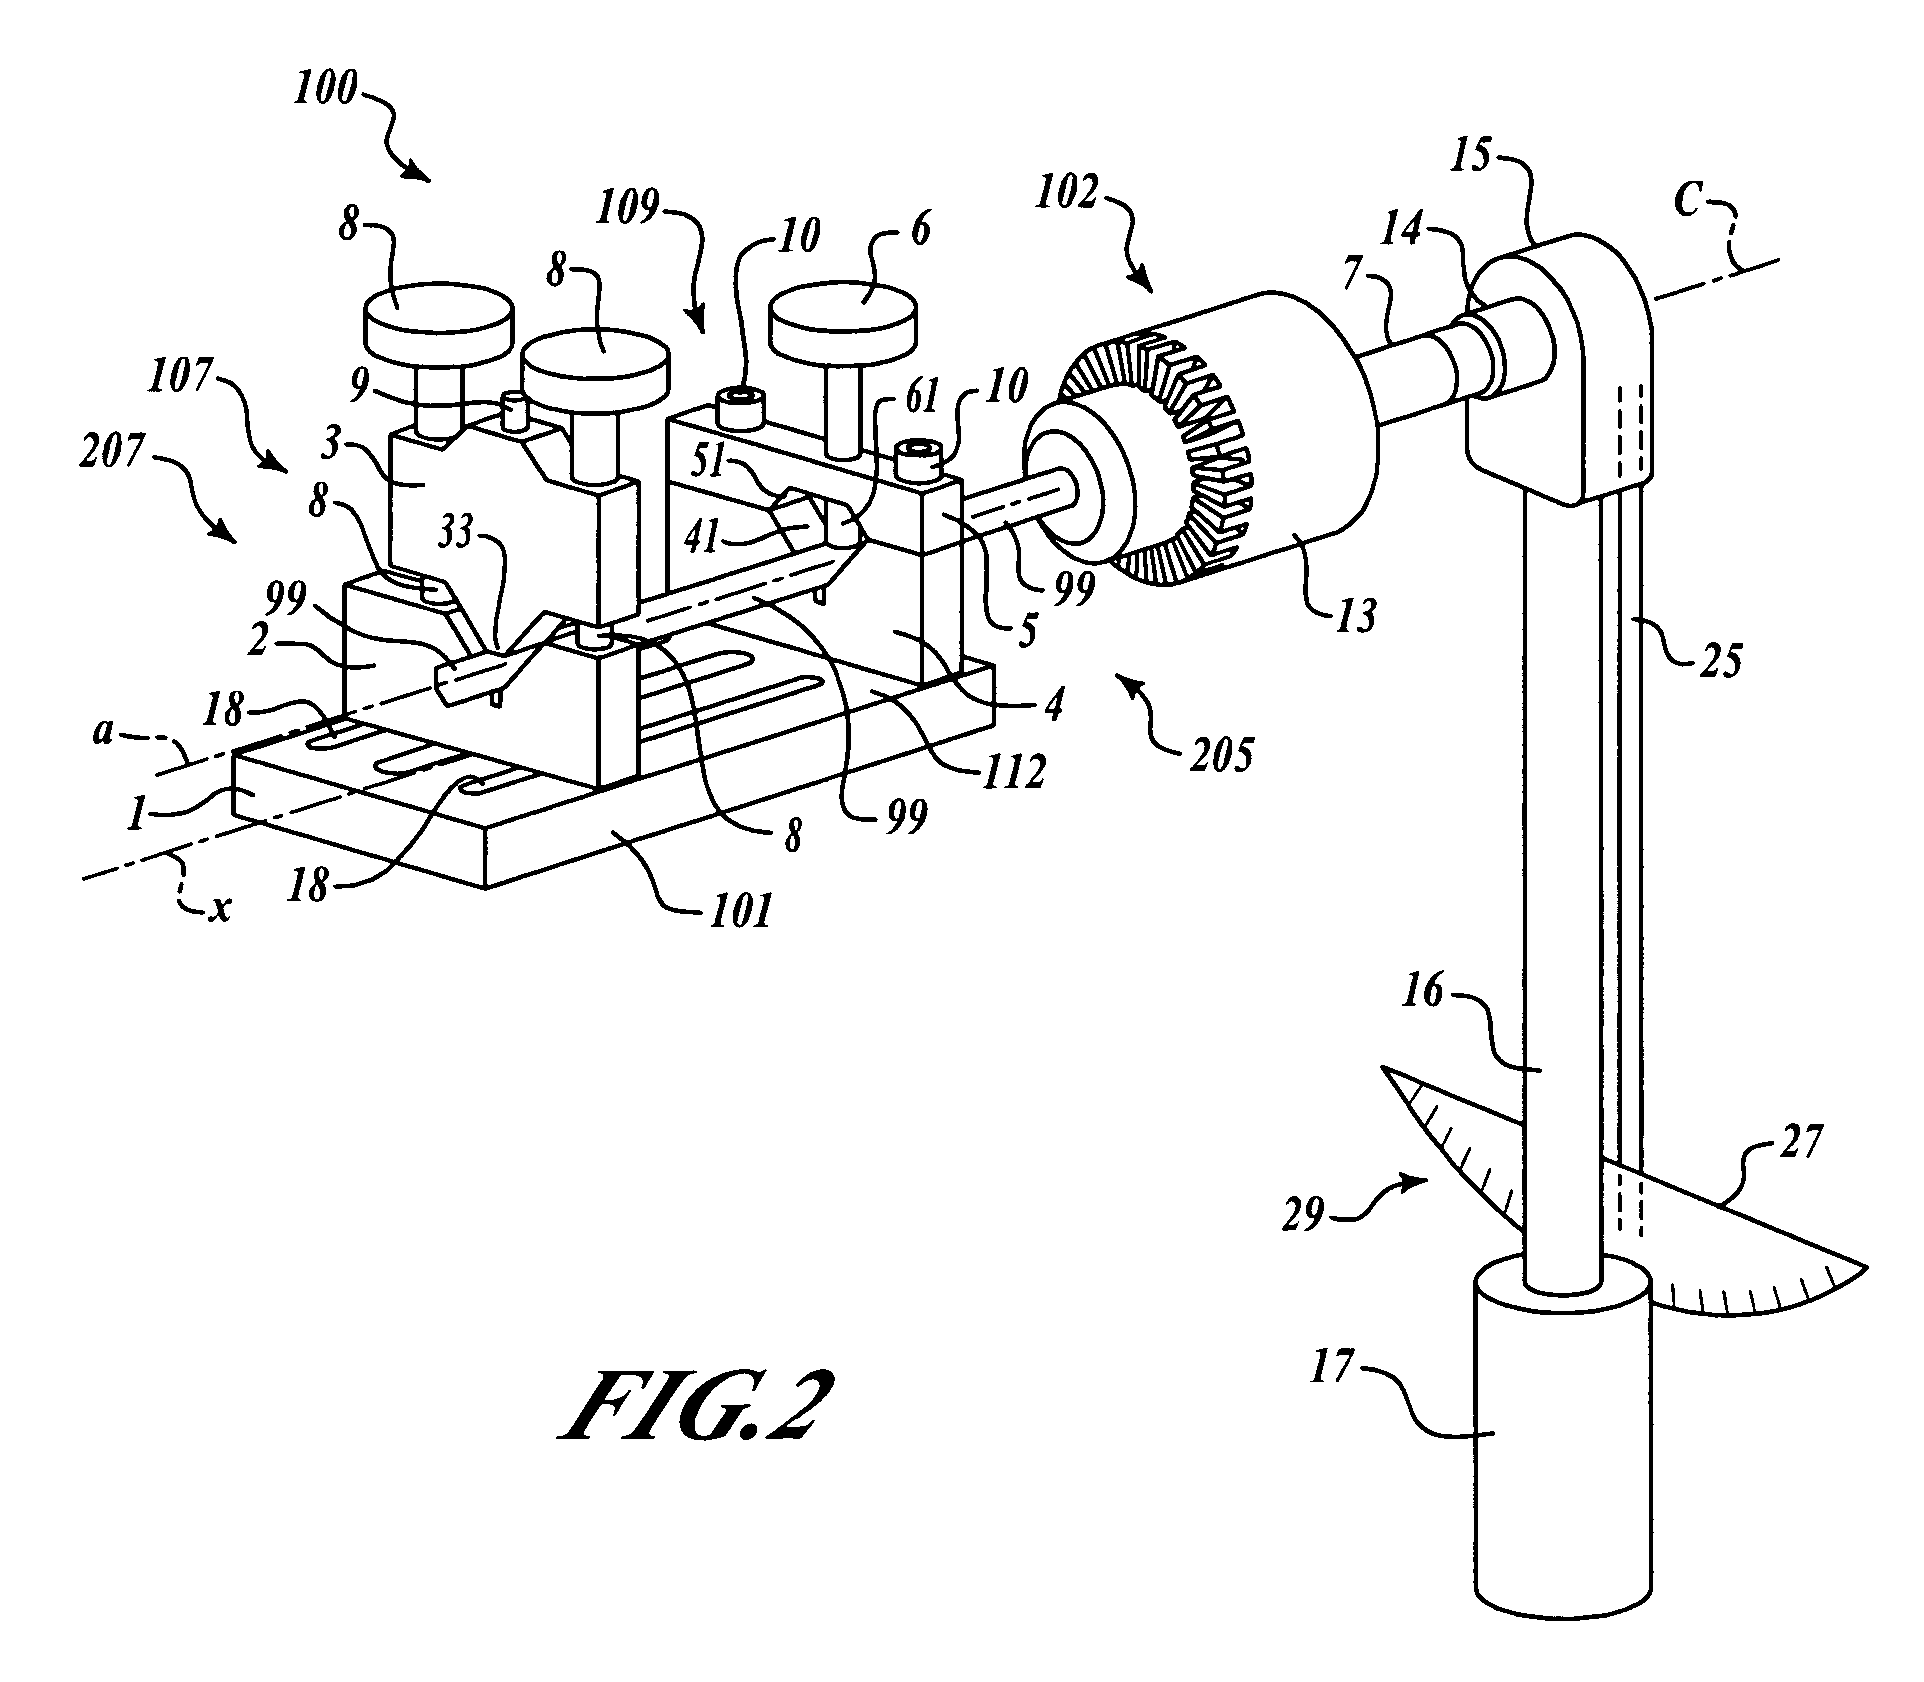 Brazed joint torque test apparatus and methods